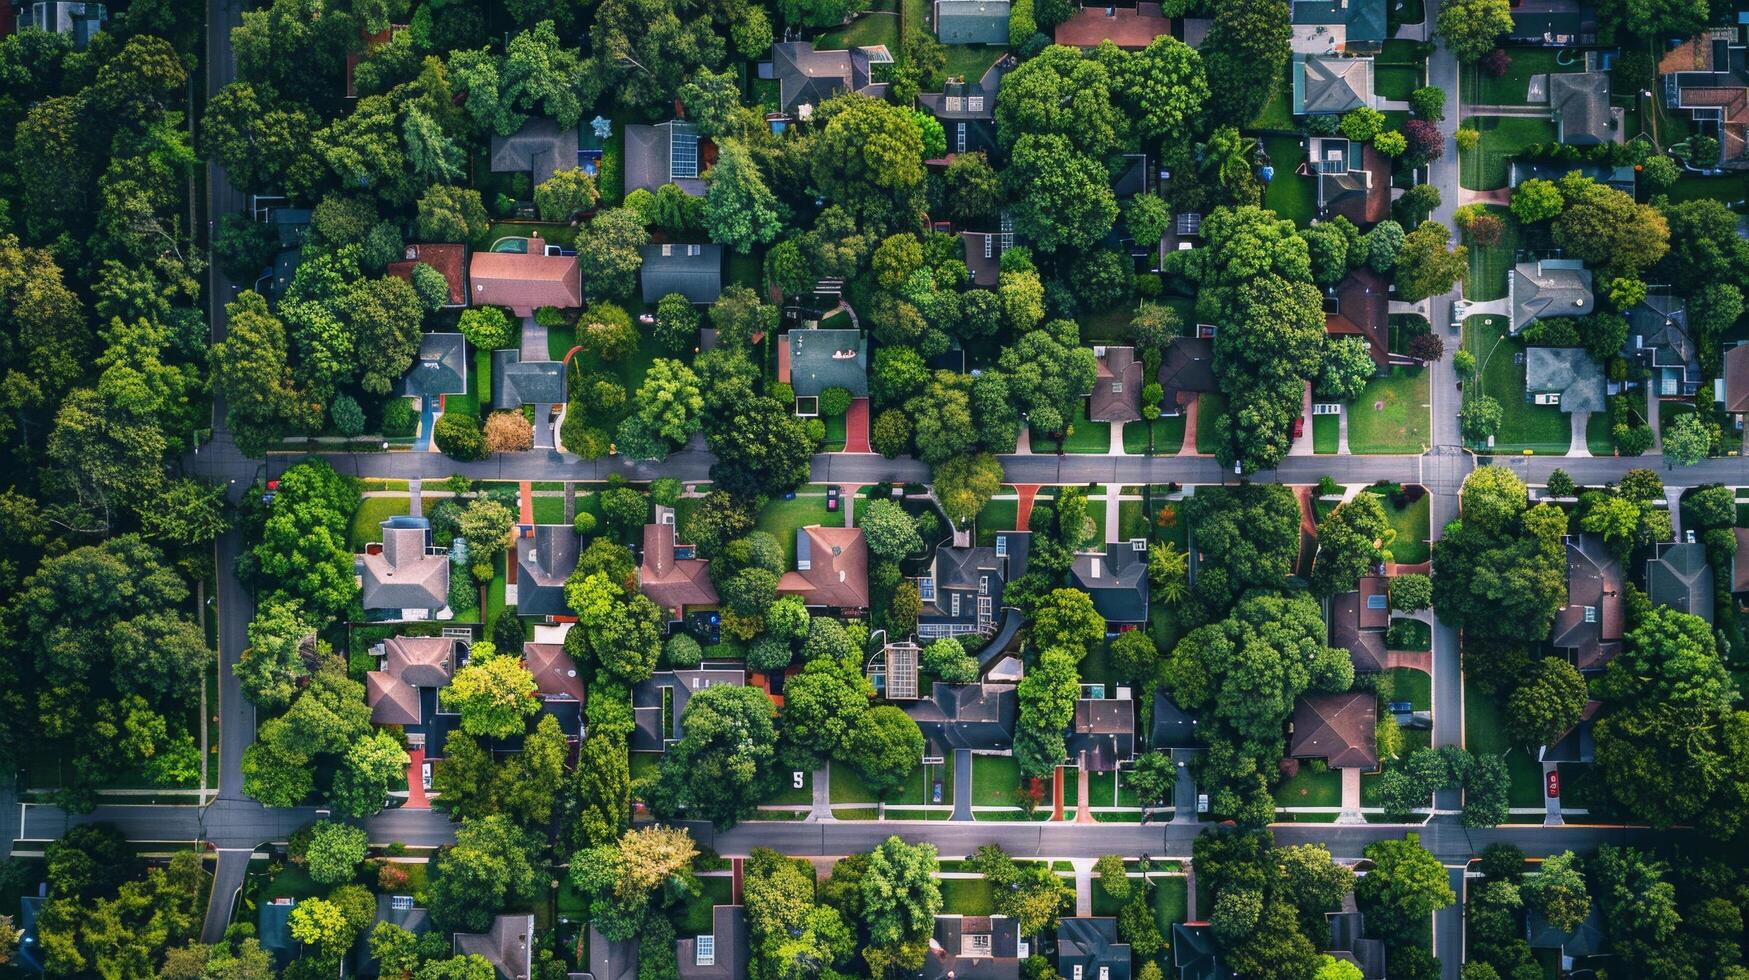 Aerial View of Residential Neighborhood With Abundant Trees photo